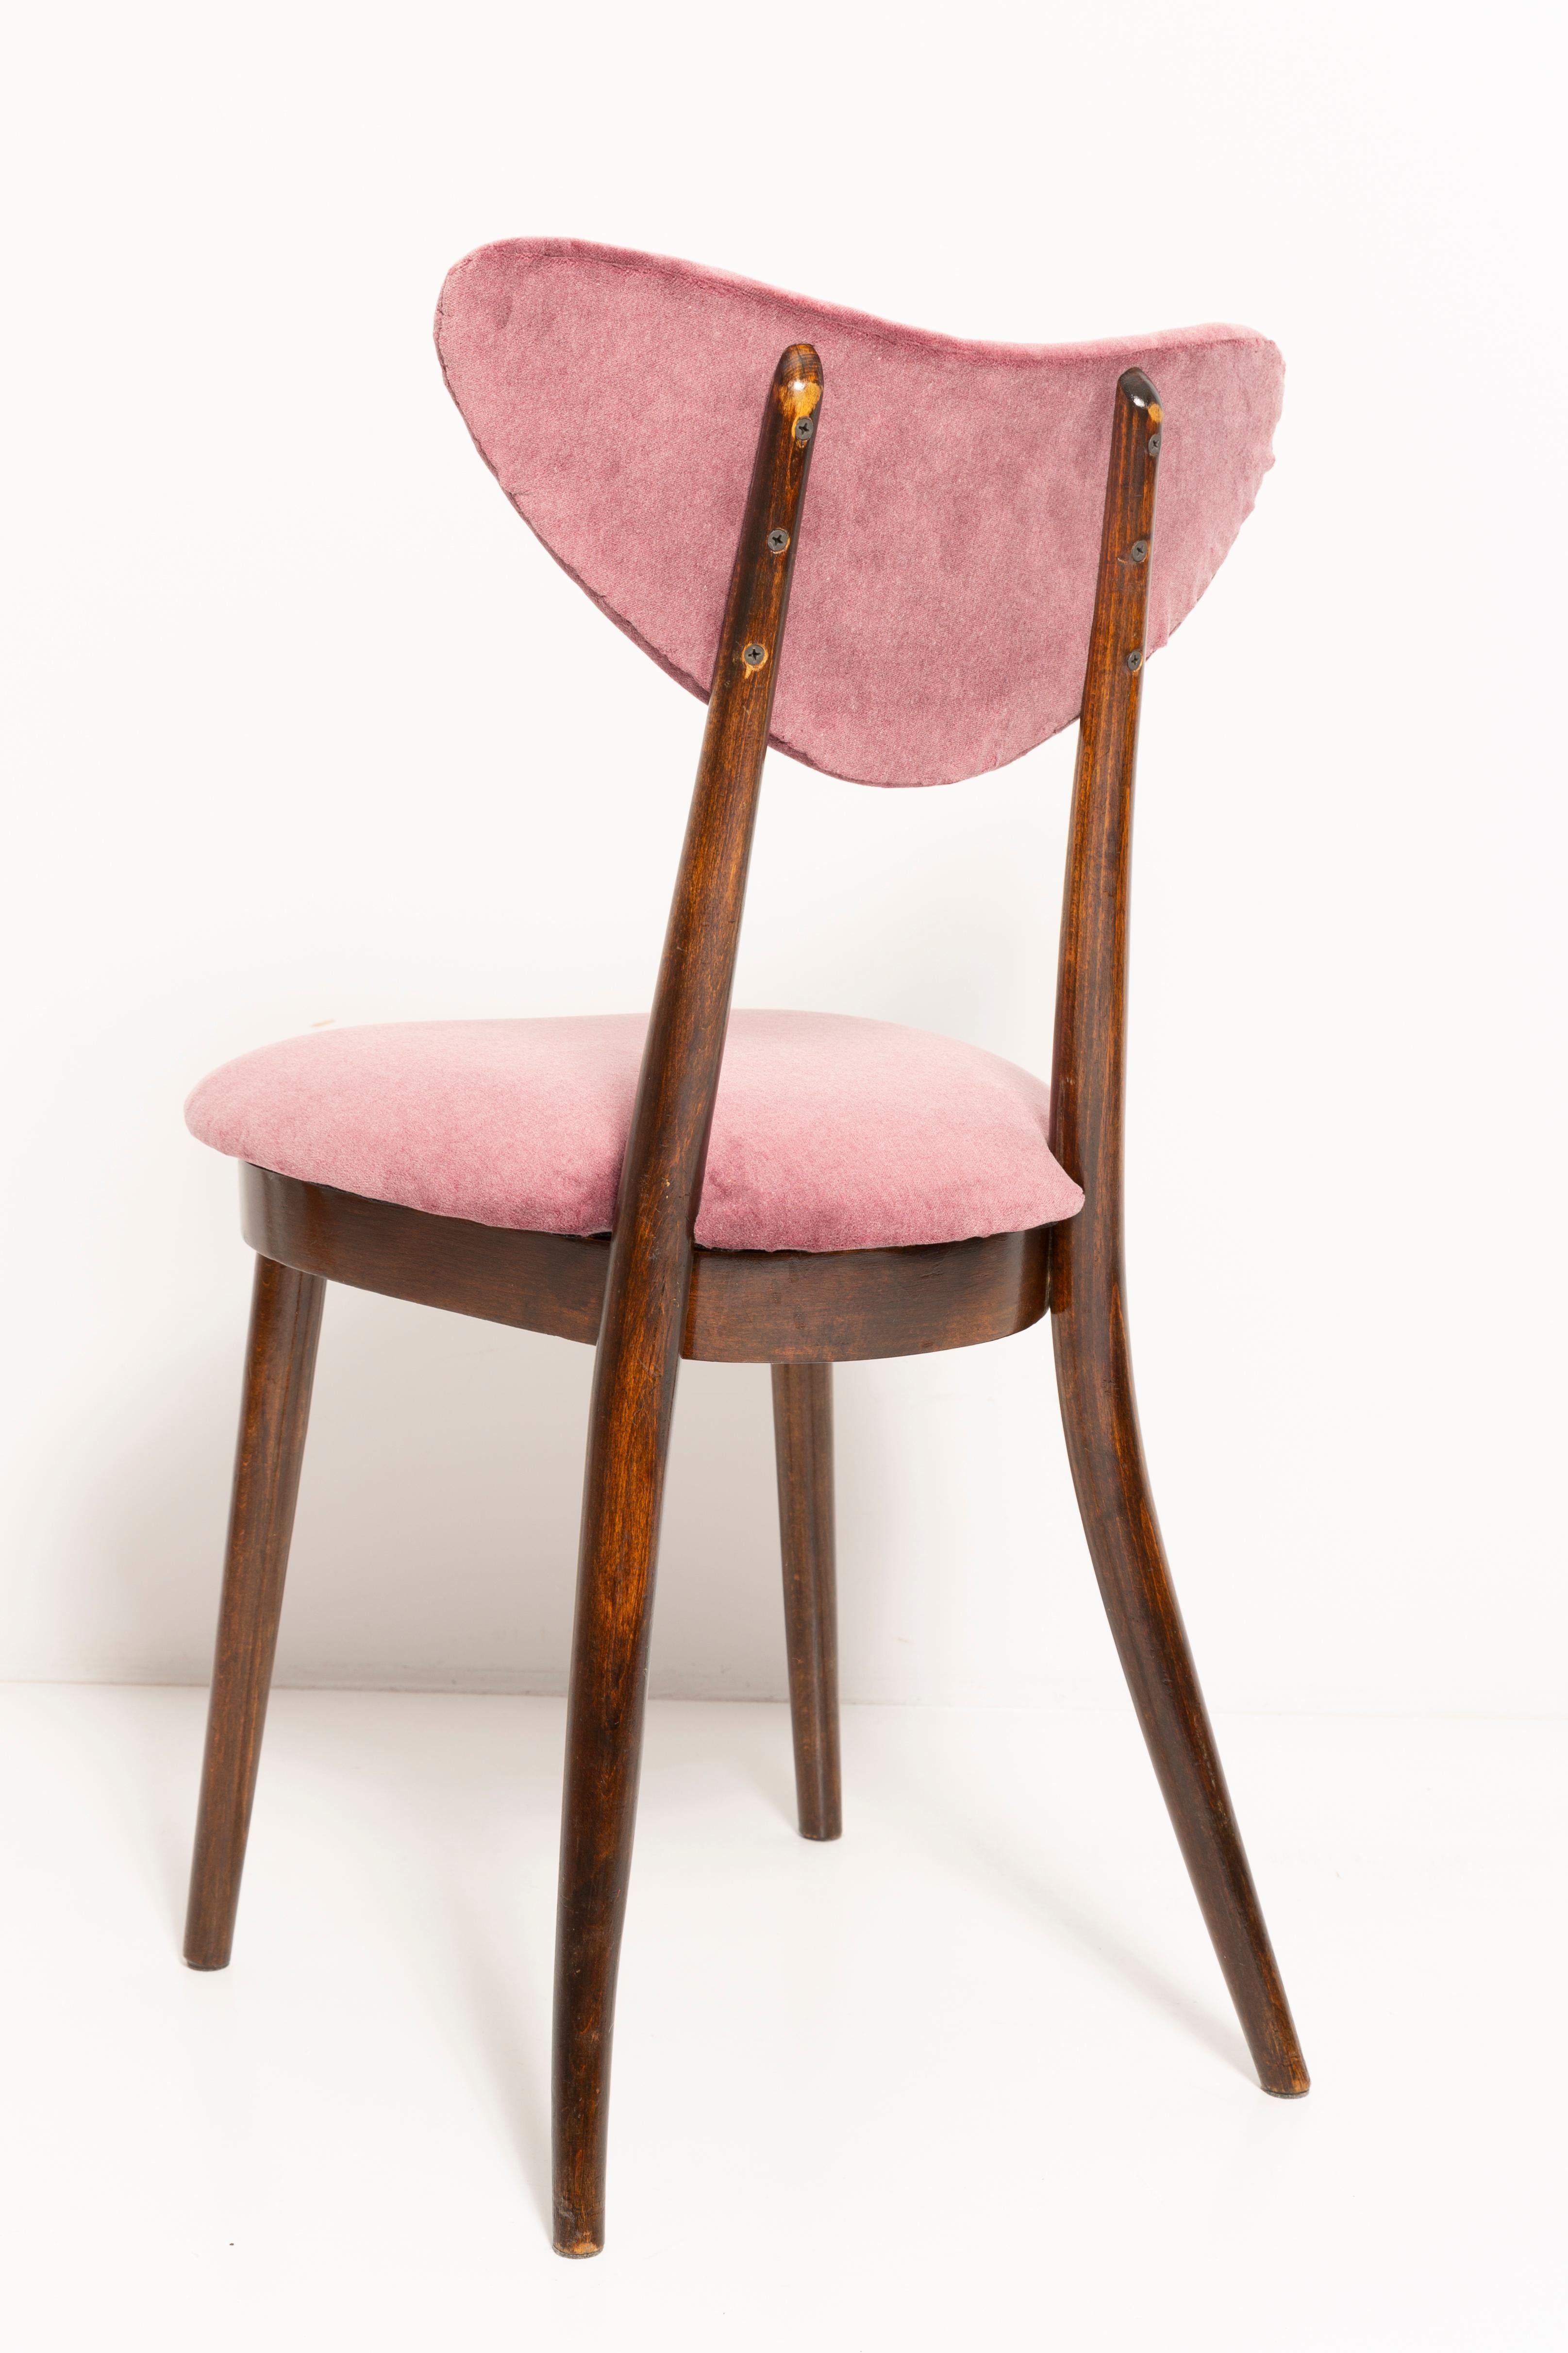 Set of Four Mid Century Burgundy Cotton-Velvet Heart Chairs, Europe, 1960s For Sale 1